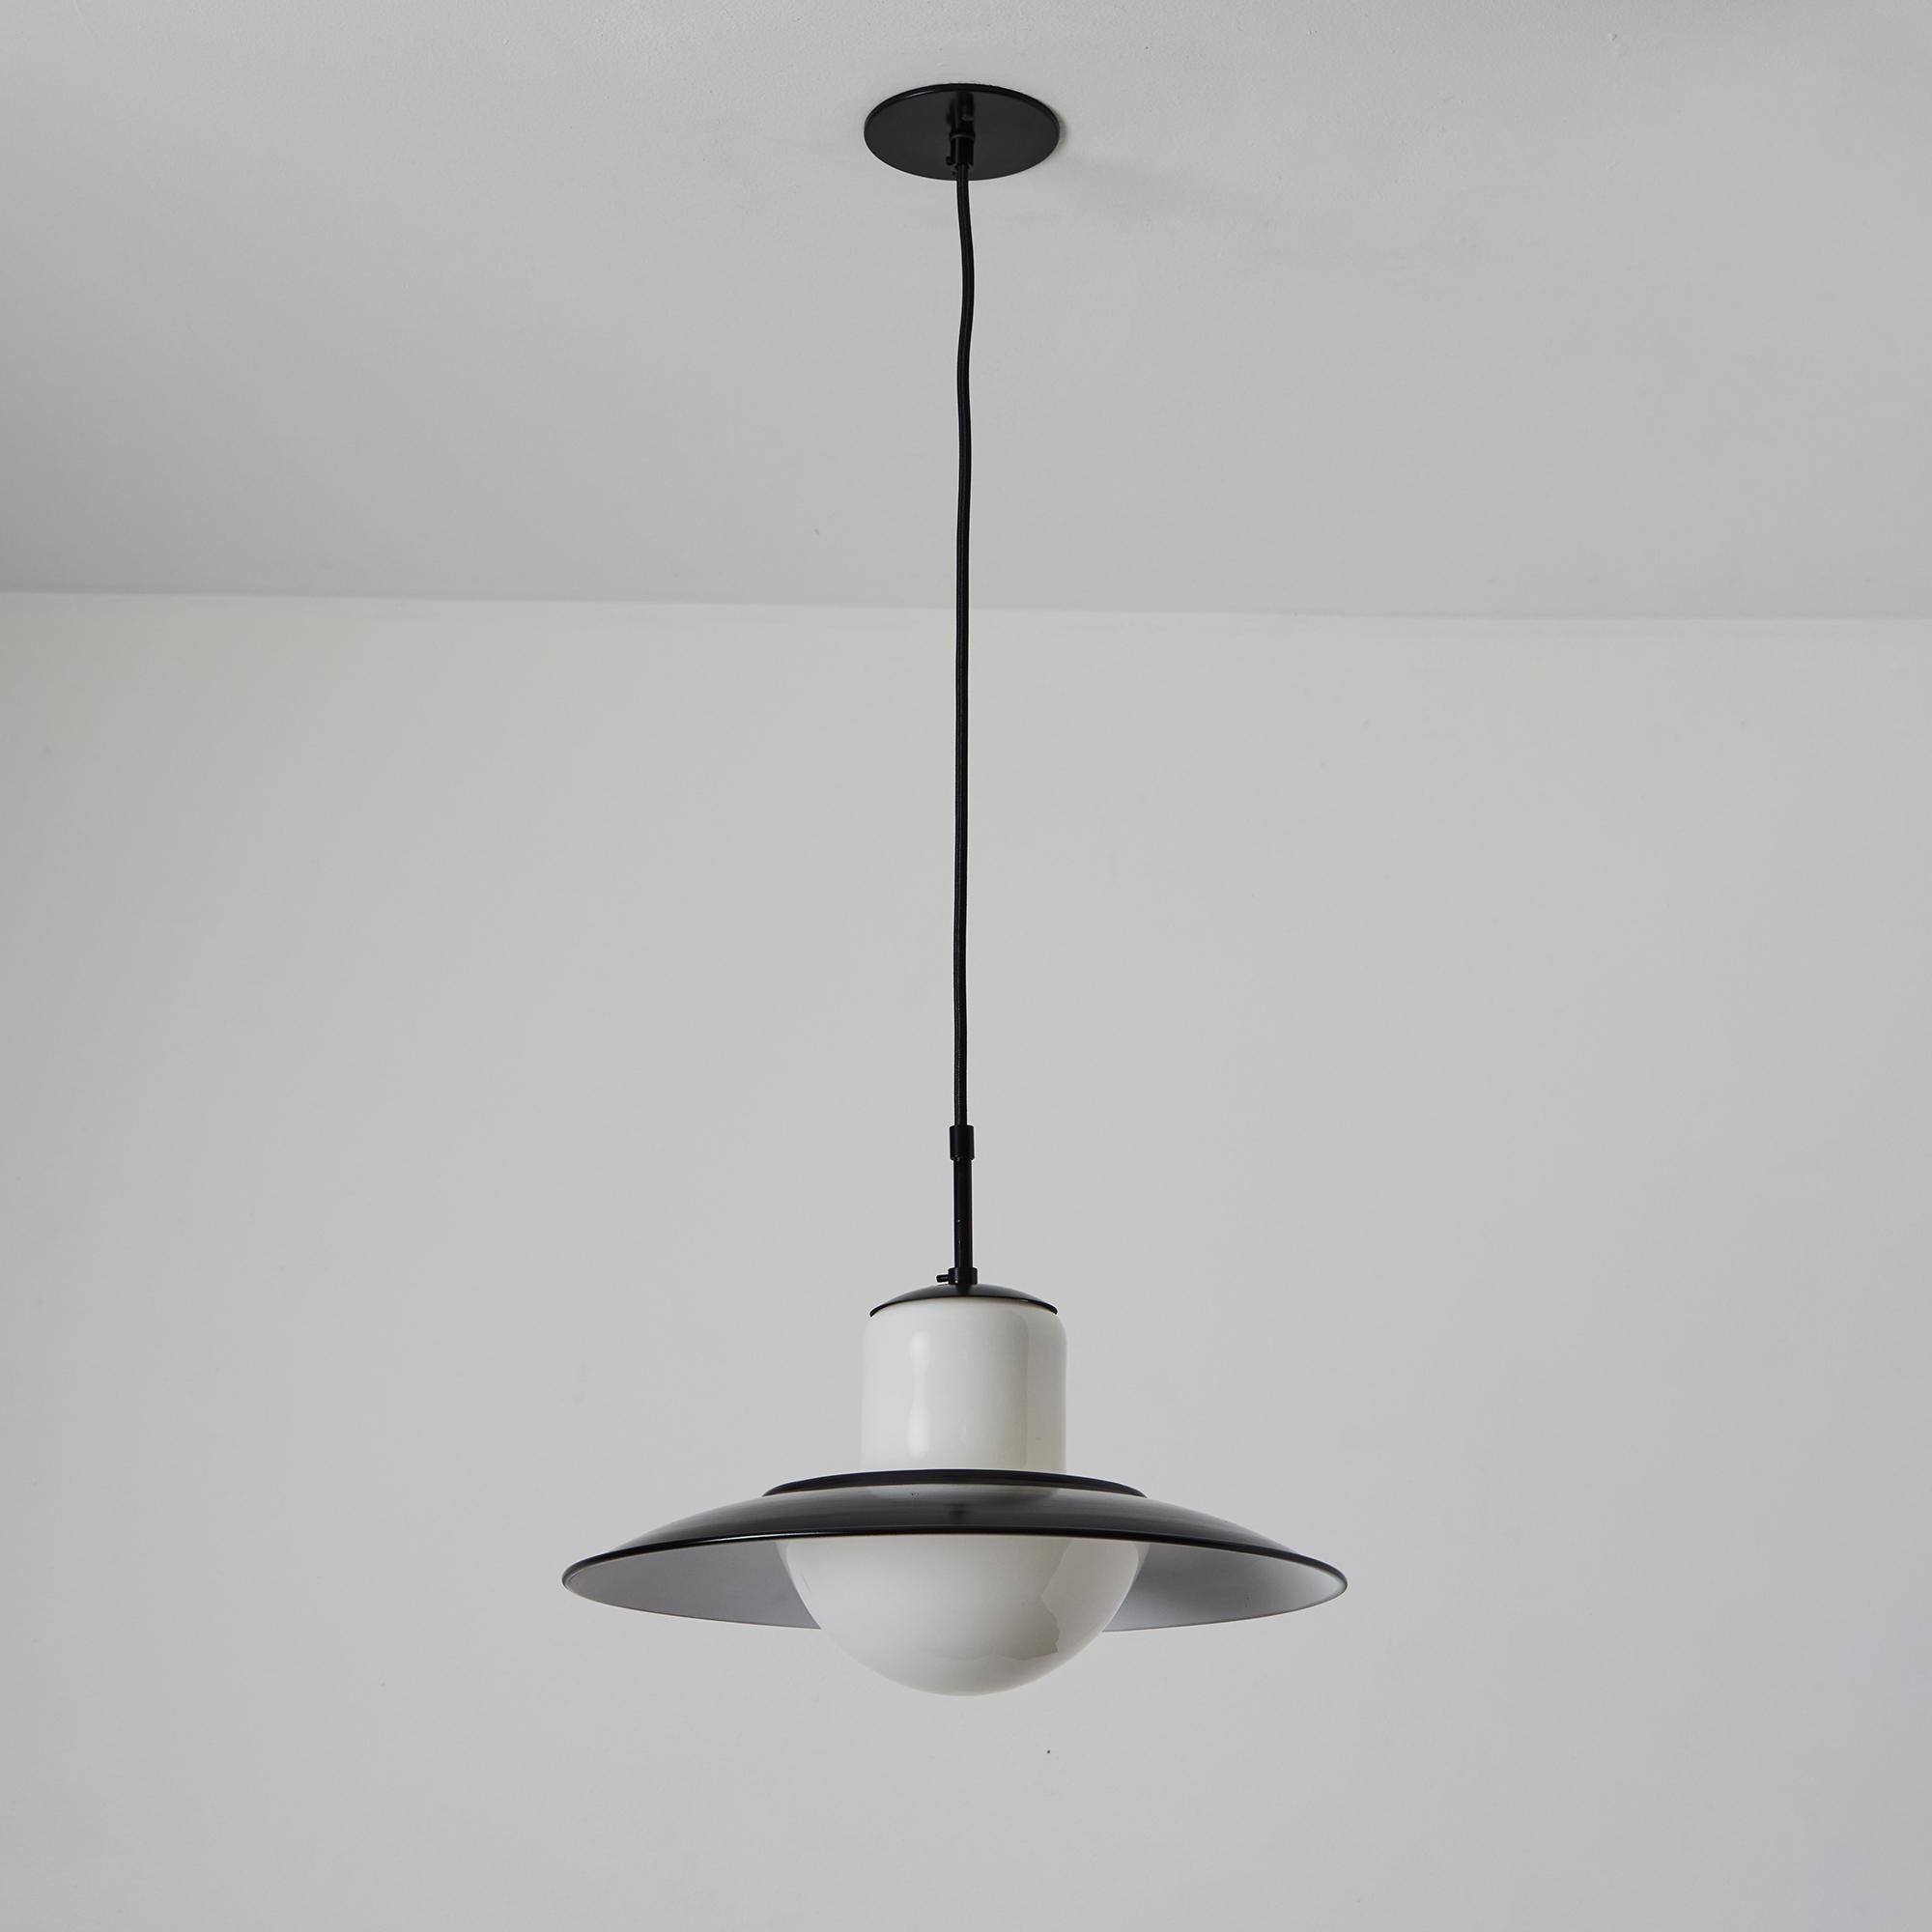 1940s Gunilla Jung Model #1005 Glass & Metal Ceiling Lamp for Stockmann Orno. Executed in blown opaline glass with black painted metal hardware.

A contemporary of Paavo Tynell, the incredibly refined work of Gunilla Jung has become increasingly